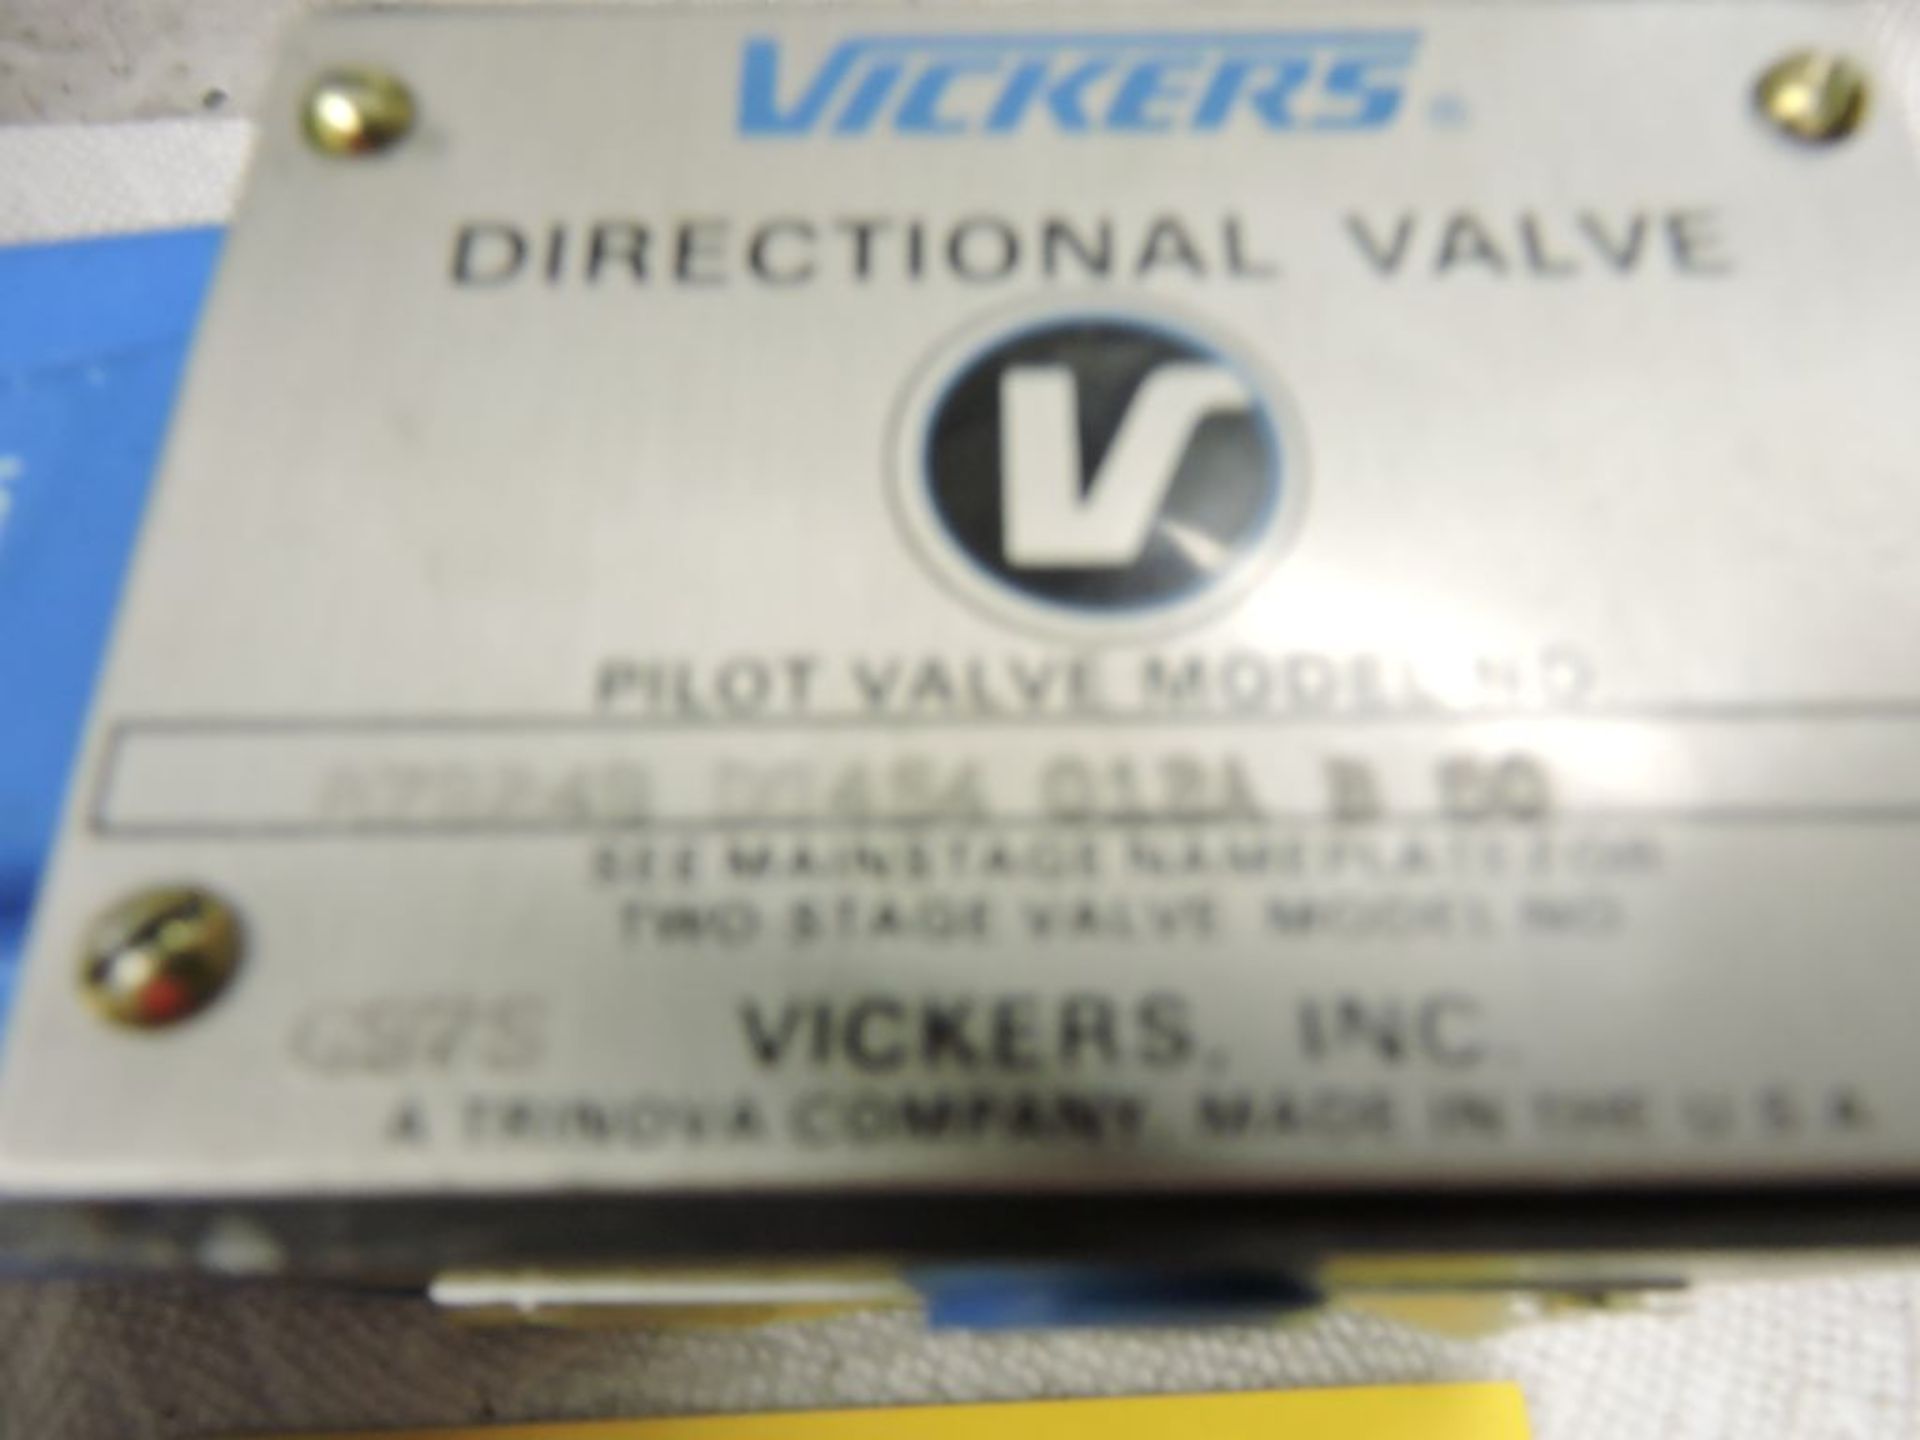 Vickers Directional valve: 879249D6454012ab60. - Image 3 of 3